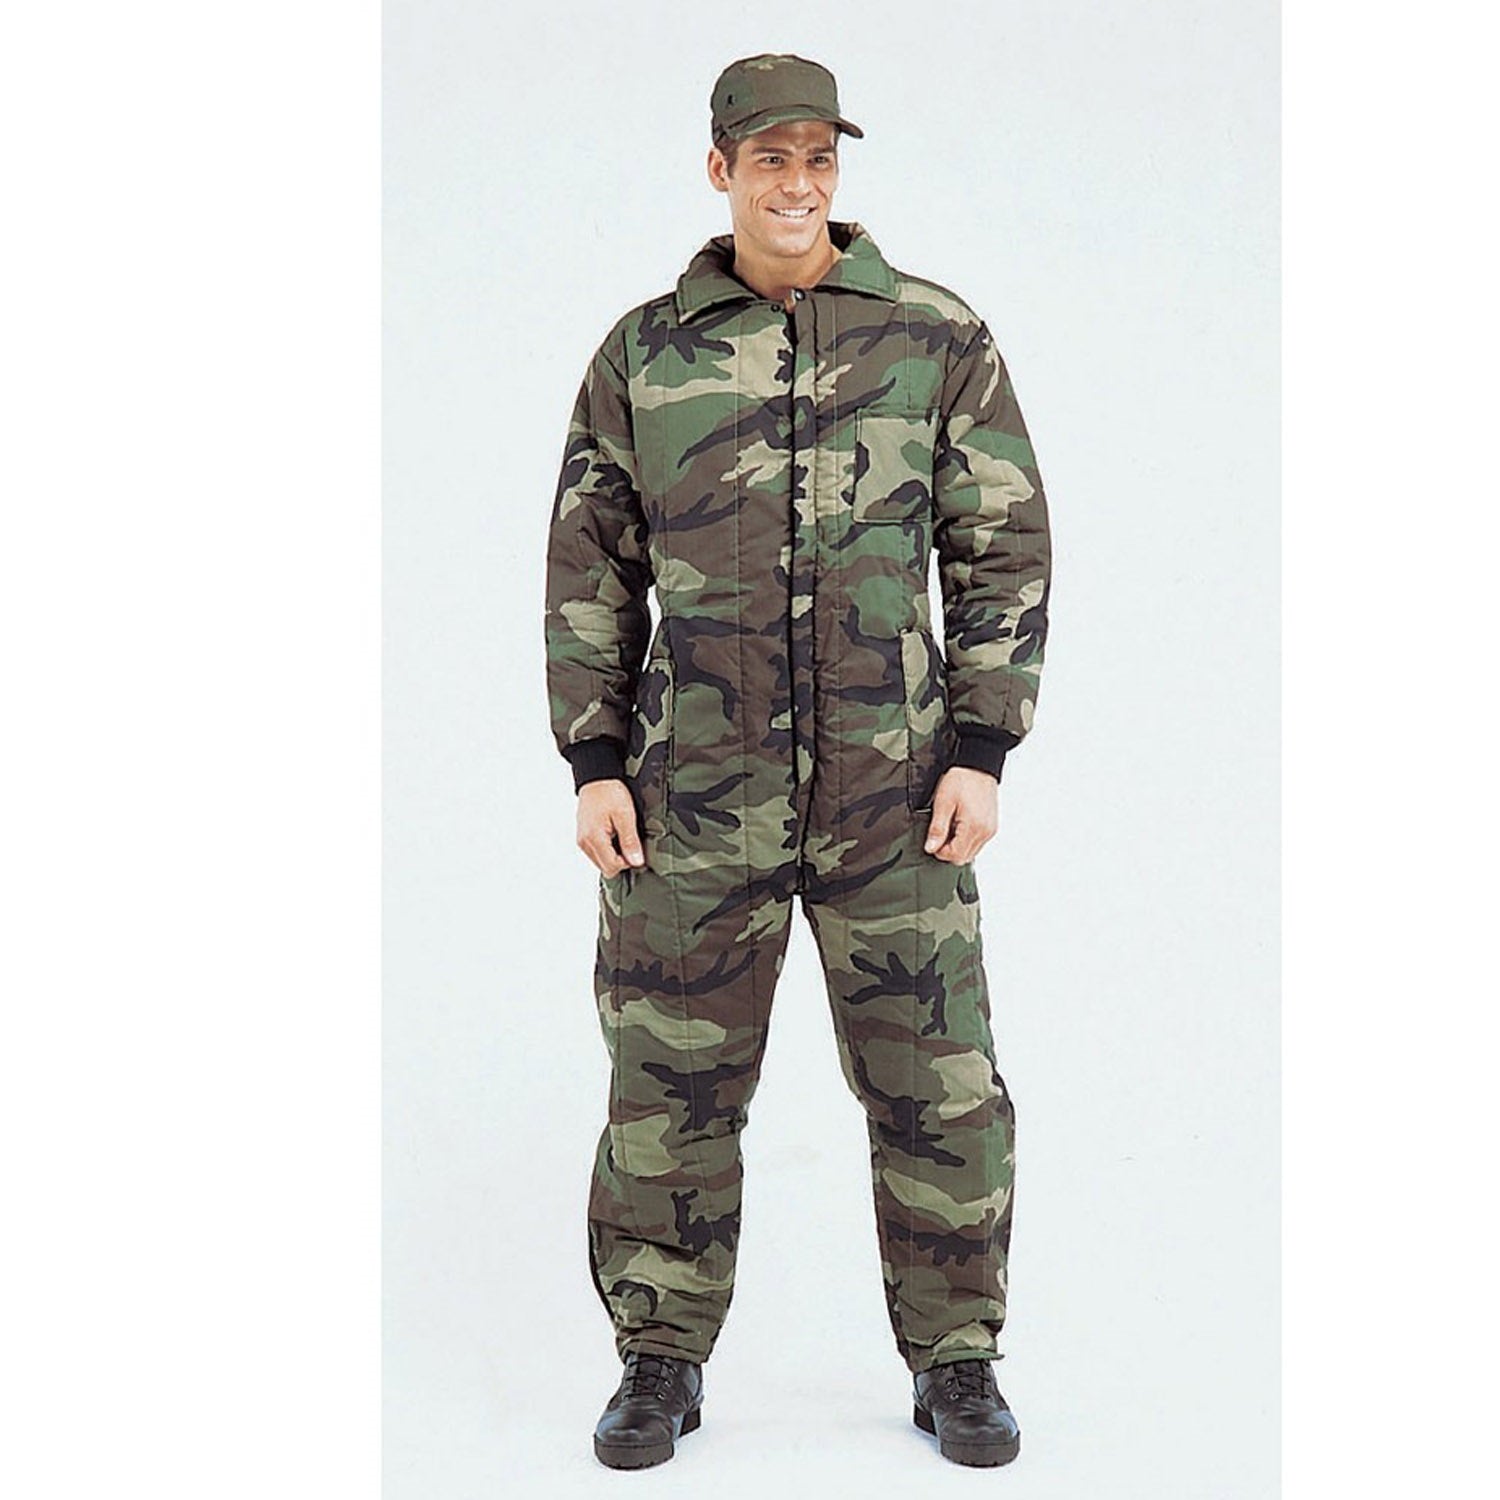 Rothco Insulated Coveralls - Cold Weather Gear